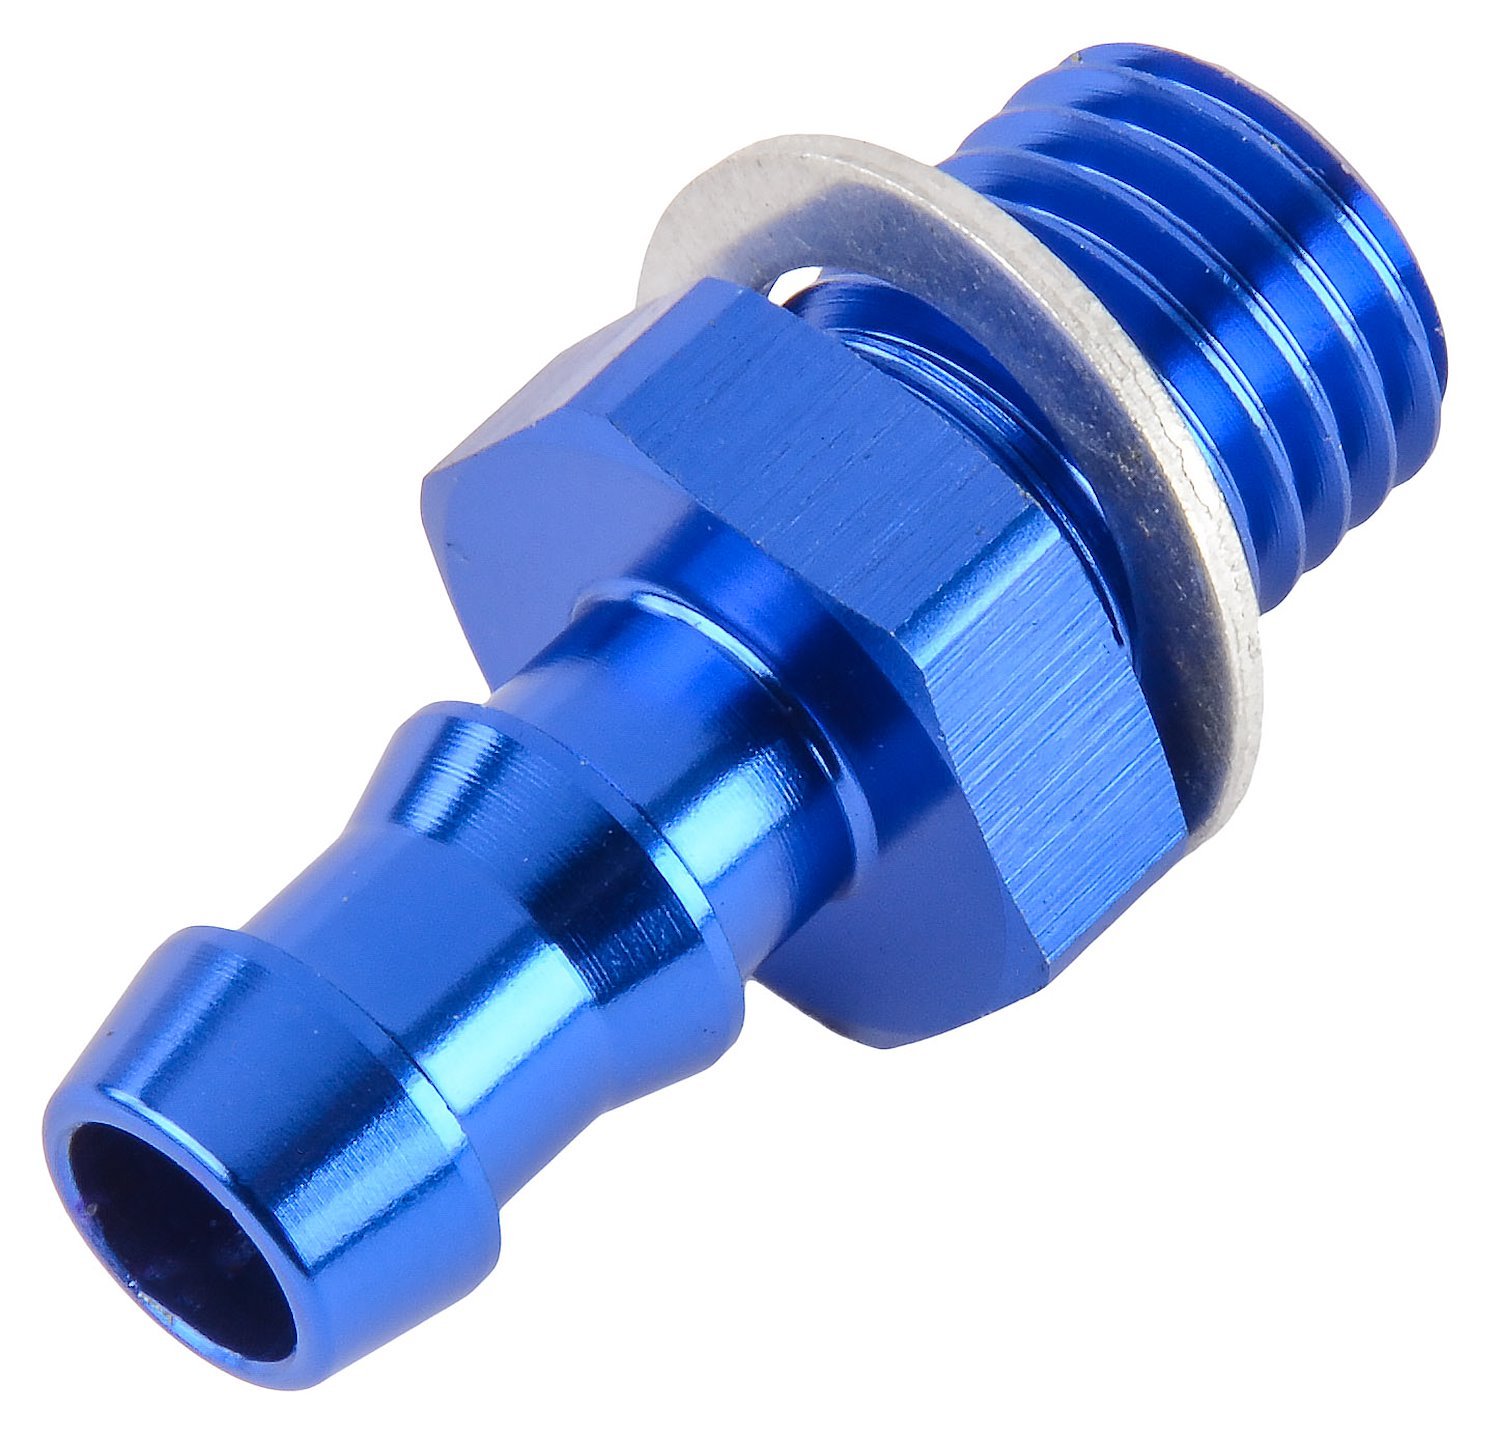 Hose Barb Adapter 12mm x 1.5 Male Straight to 5/16" Hose